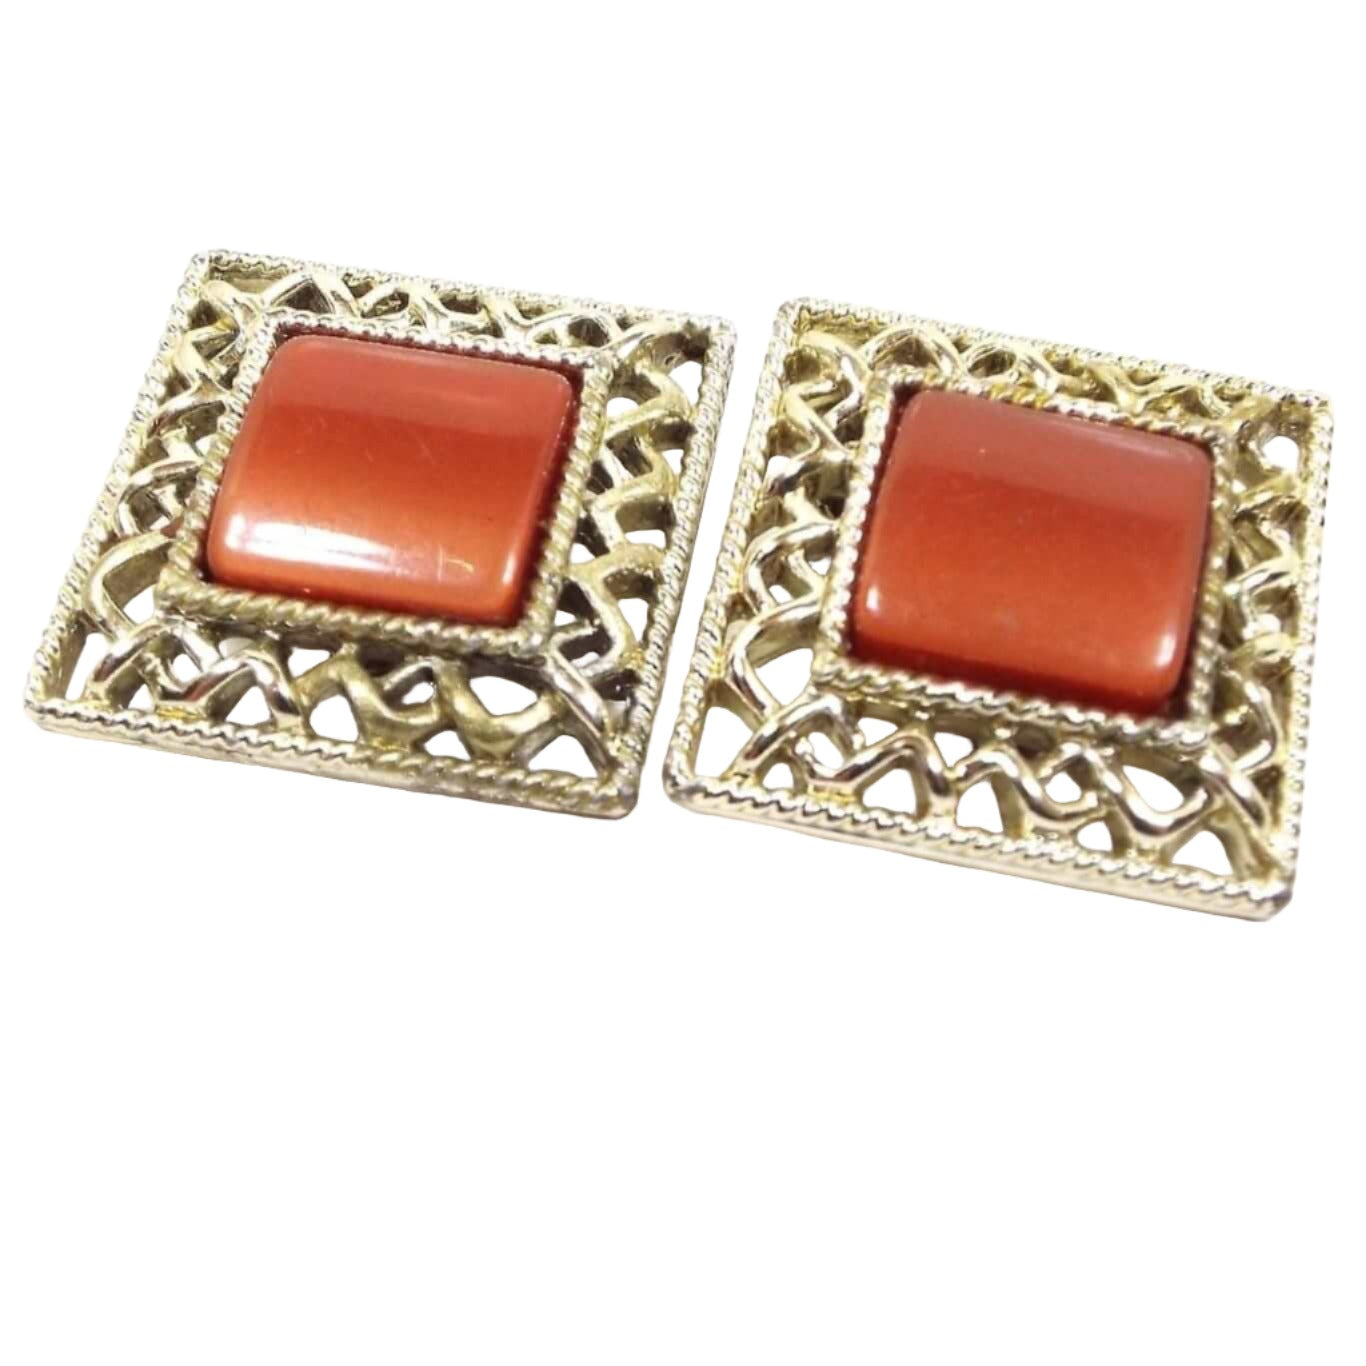 Front view of the Mid Century vintage Coro clip on earrings. They are square in shape with puffy middle lucite plastic cabs. The cabs are a pearly burnt orange in color and are surrounded by a gold tone color woven style filigree edge. 